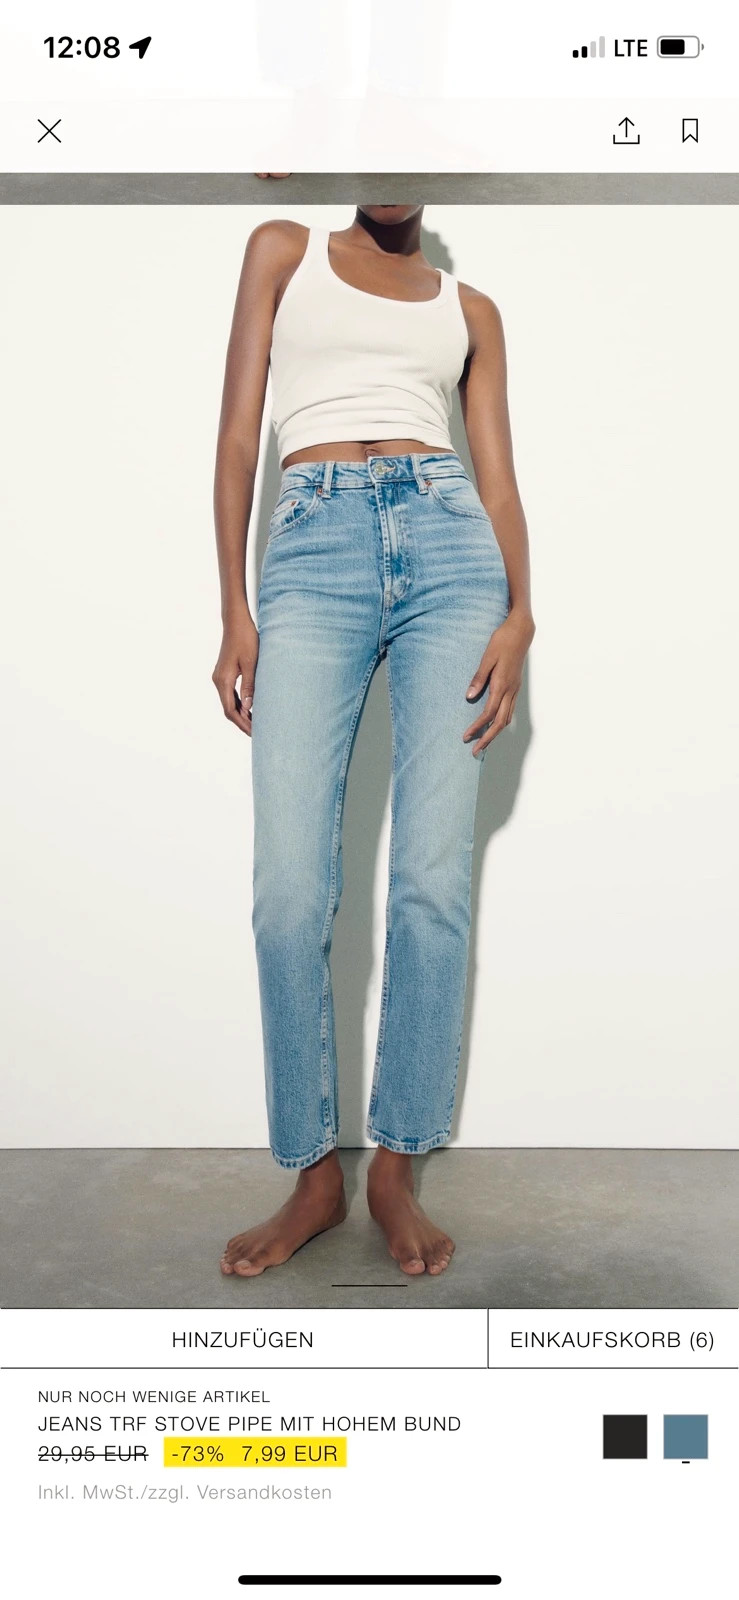 TRF STOVE PIPE JEANS WITH A HIGH WAIST